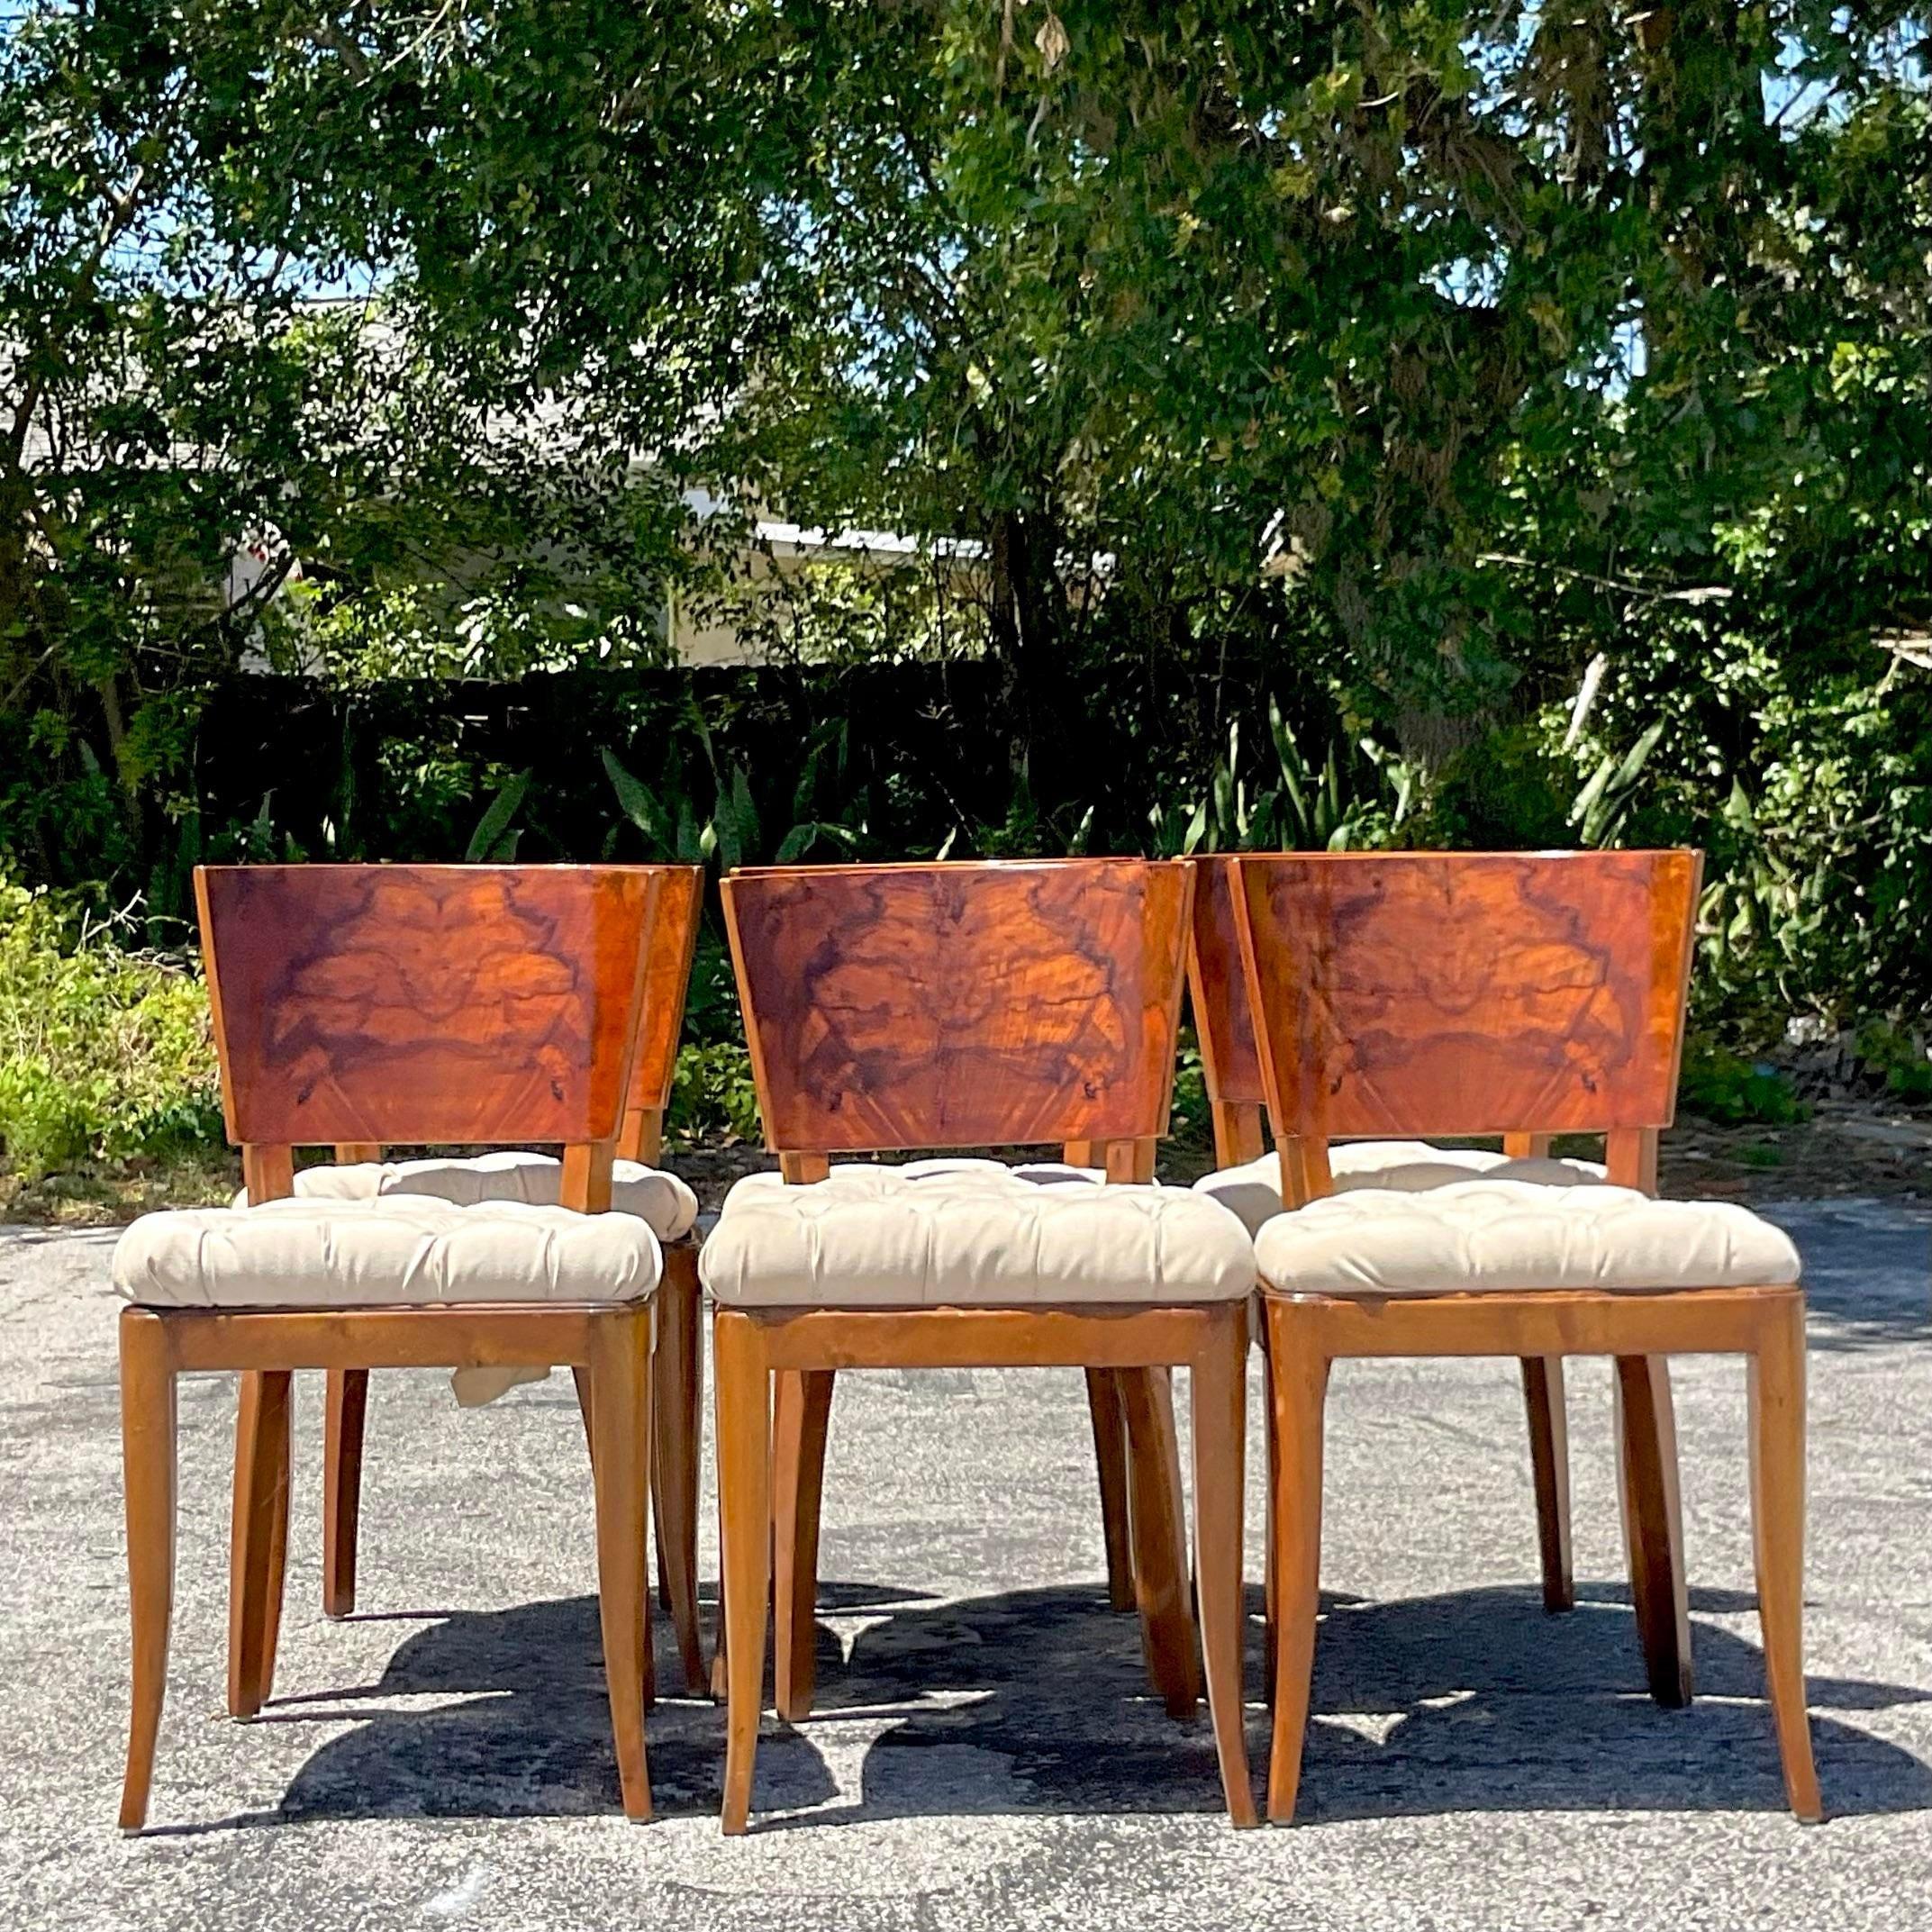 American Vintage Deco Burl Wood Dining Chairs - Set of 6 For Sale